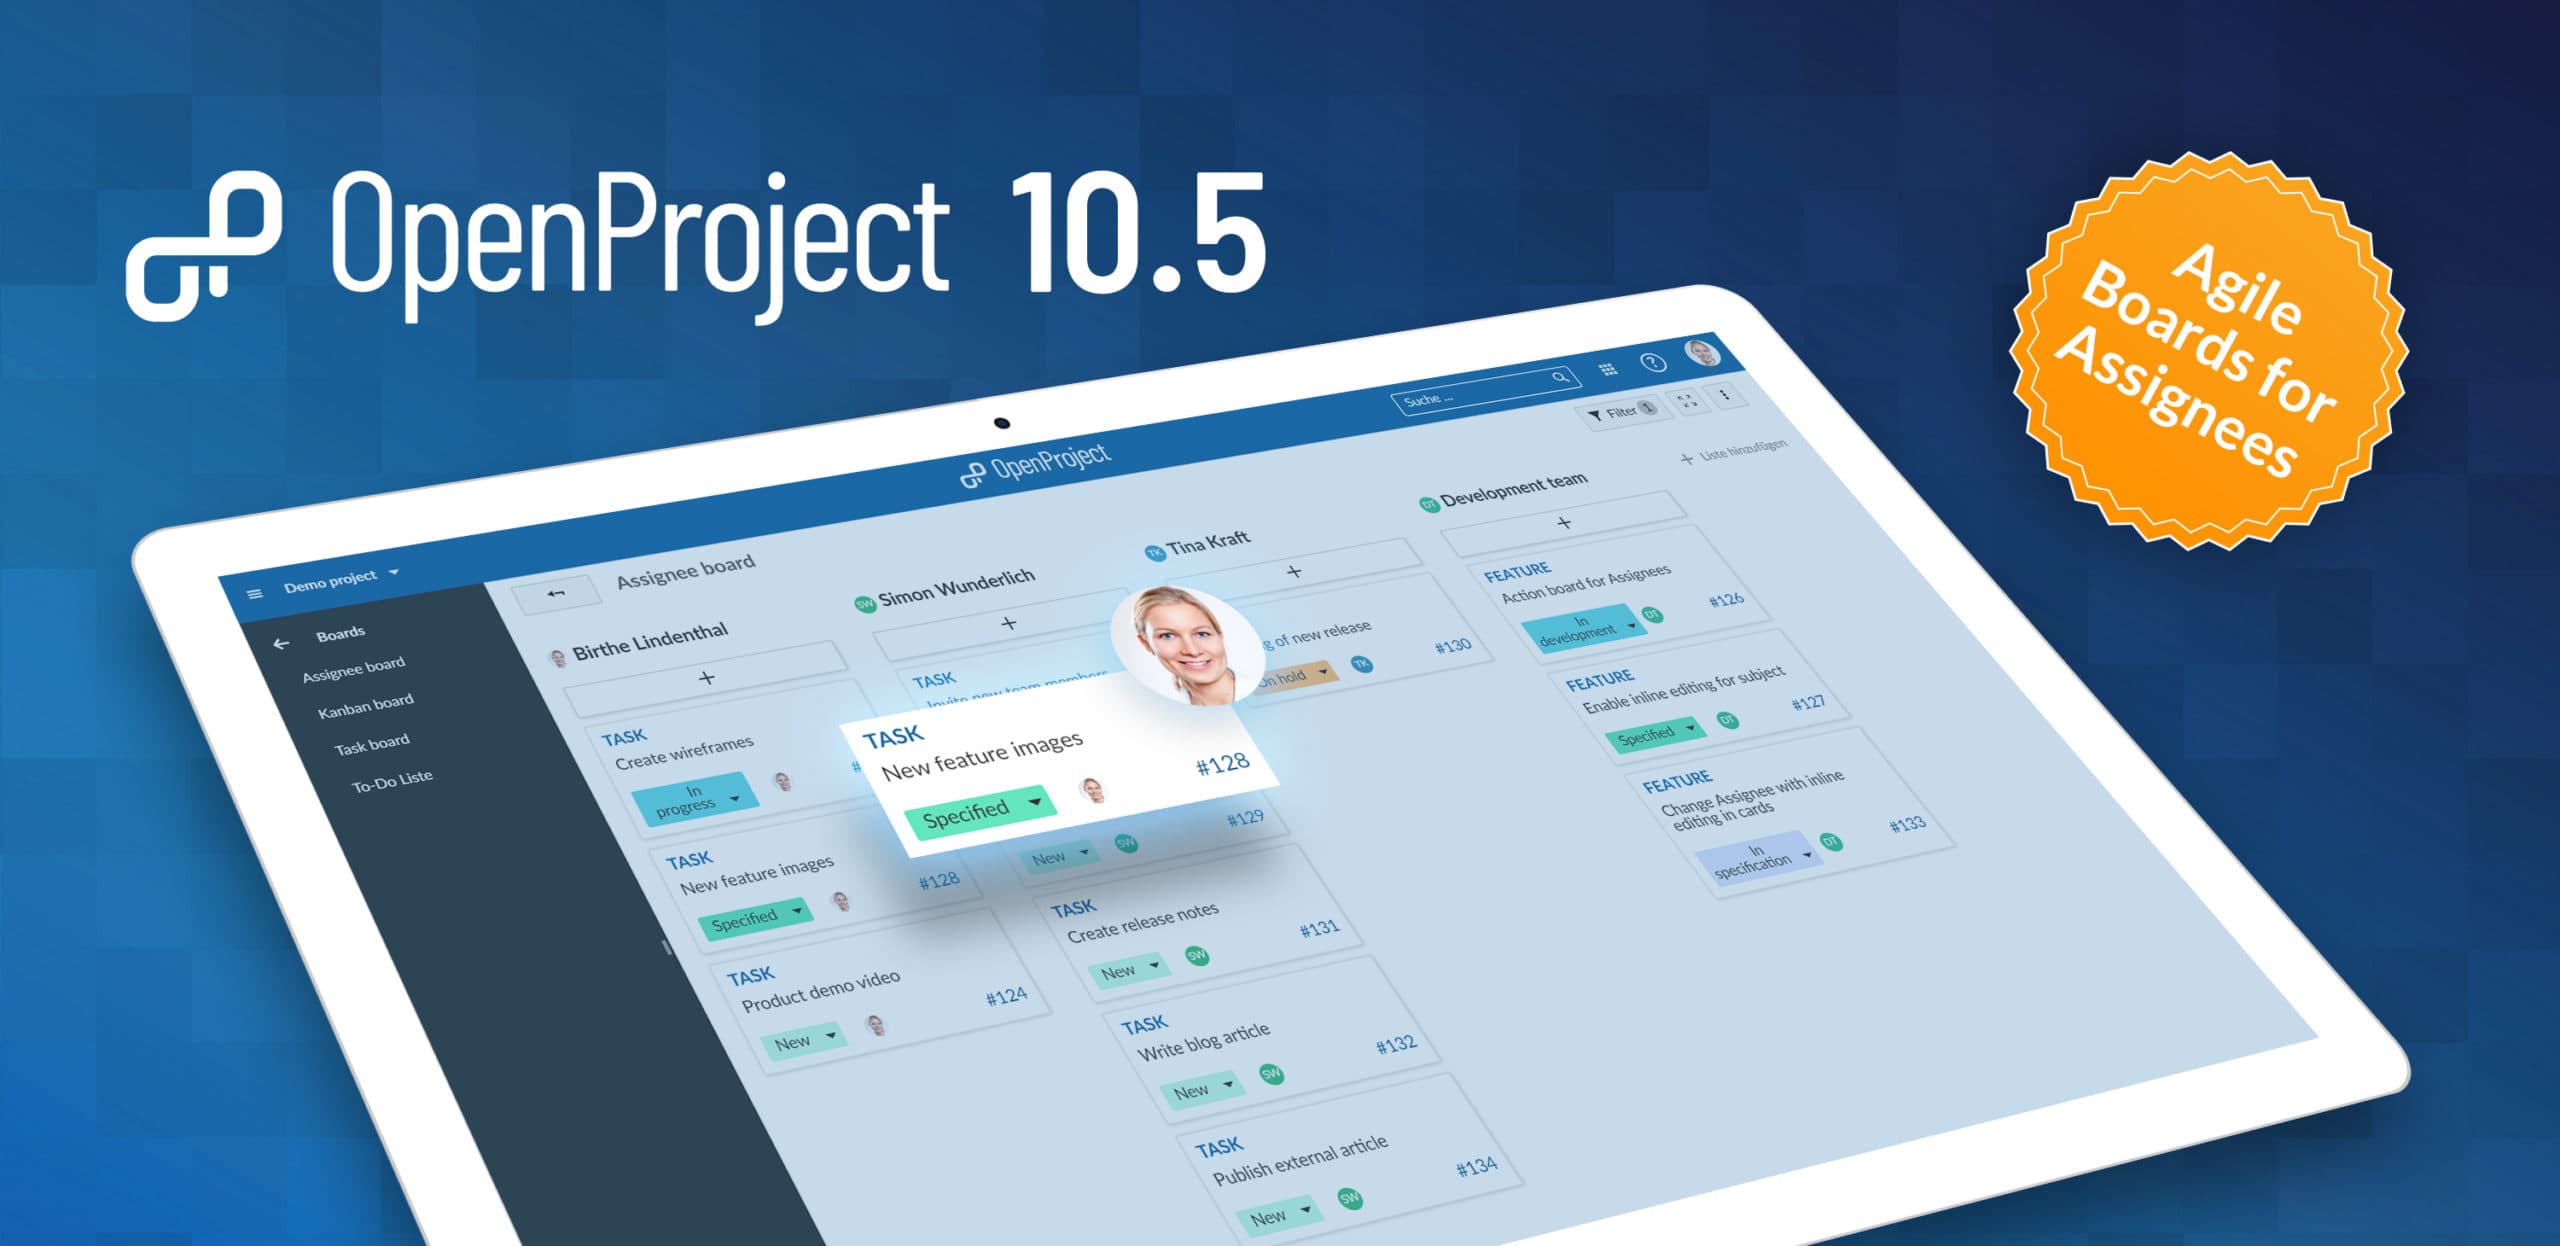 OpenProject 10.5: agile assignee boards, new sorting of versions, and time tracking restrictions removed